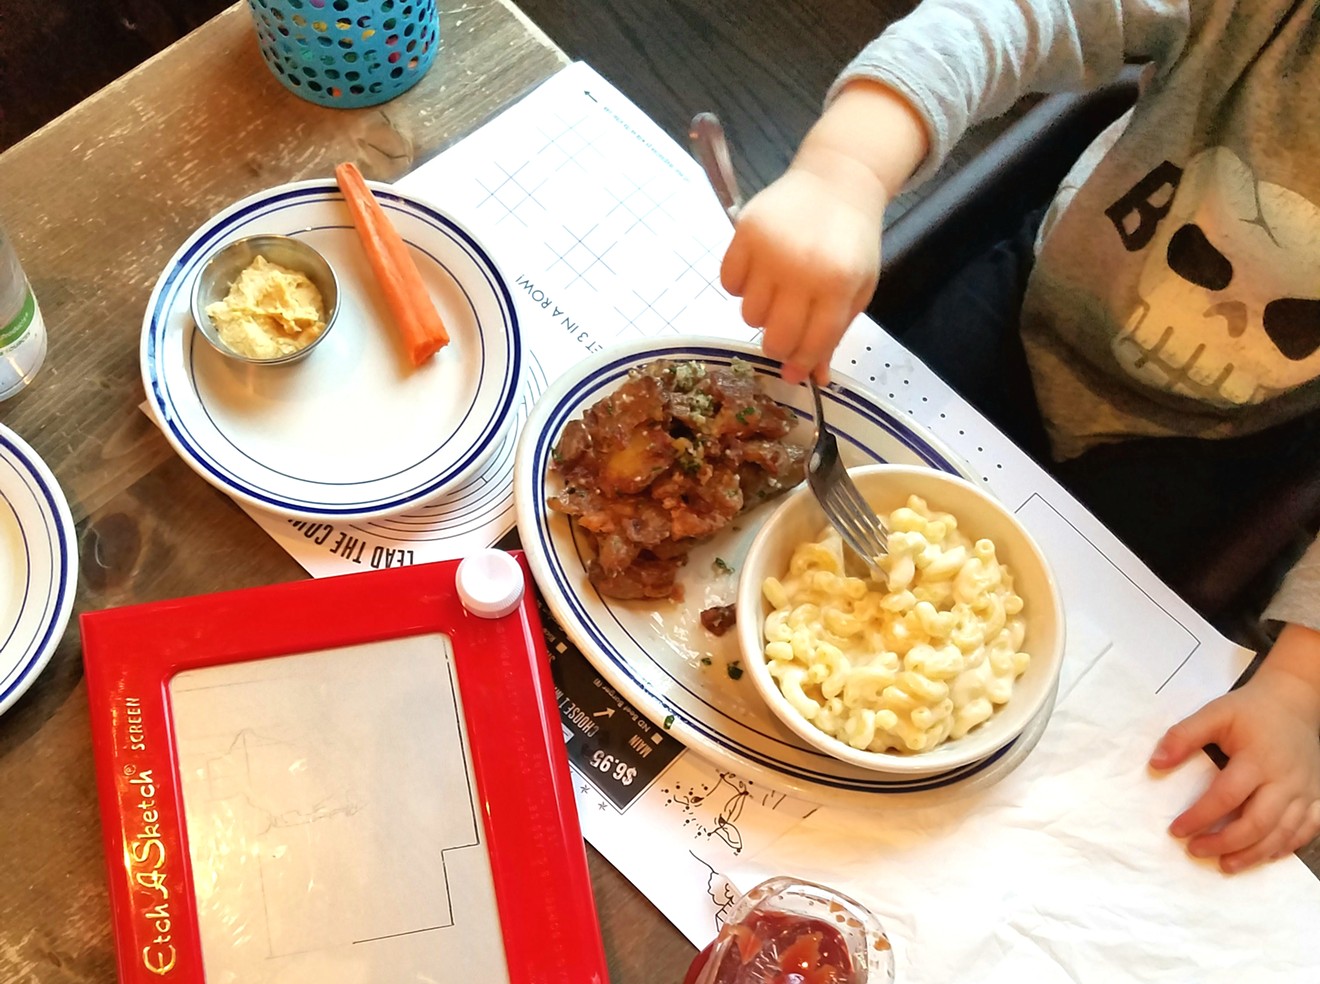 Etch A Sketch and macaroni and cheese, a great kid combo at Next Door American Eatery in Union Station.